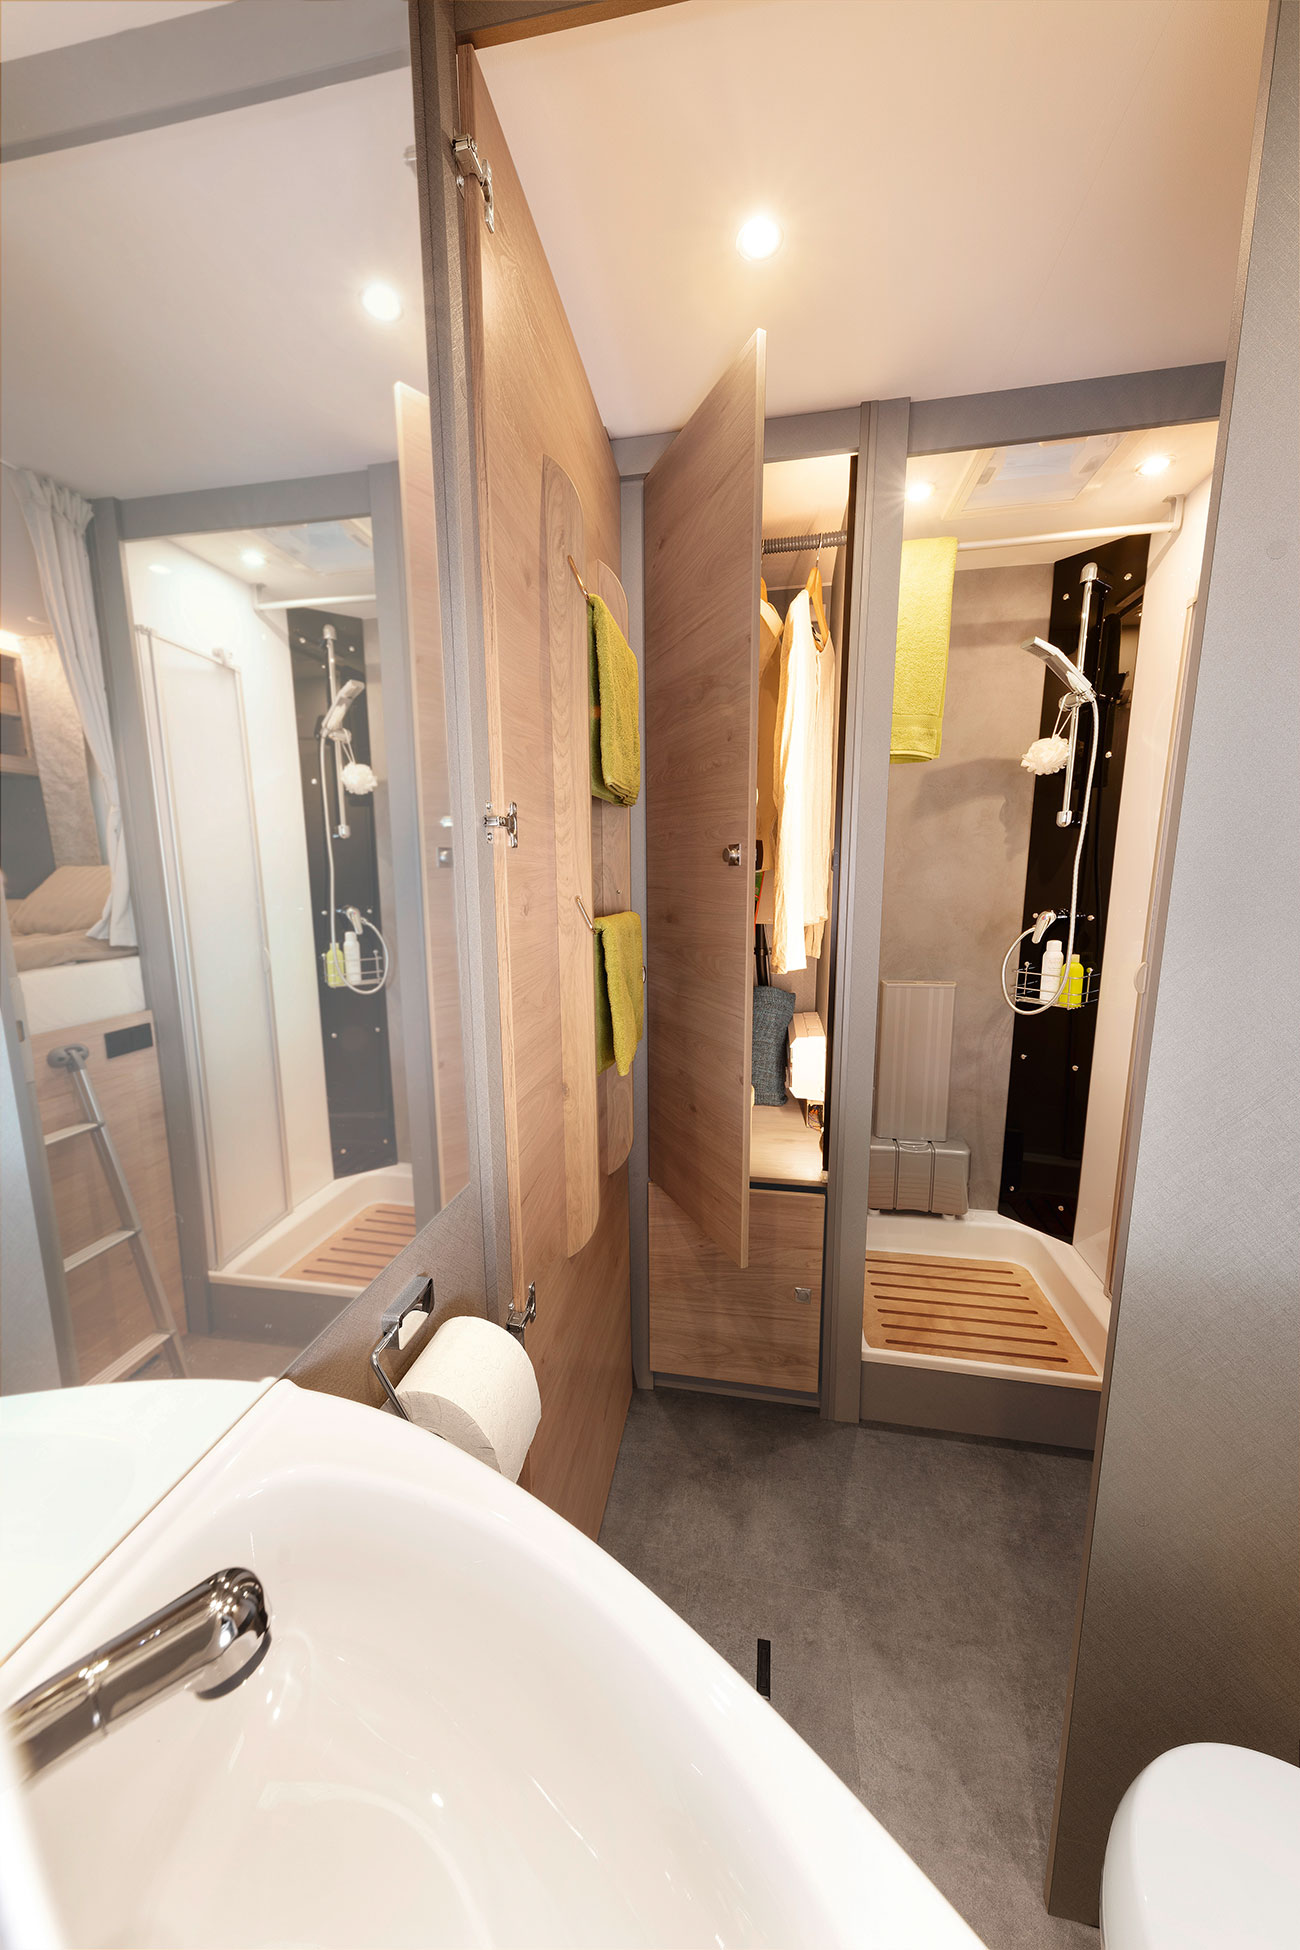 A centre bathroom that lives up to its name! The bathroom door can be used to close off the passageway to the living room. This creates a large bathroom and dressing room with direct access to the wardrobe.